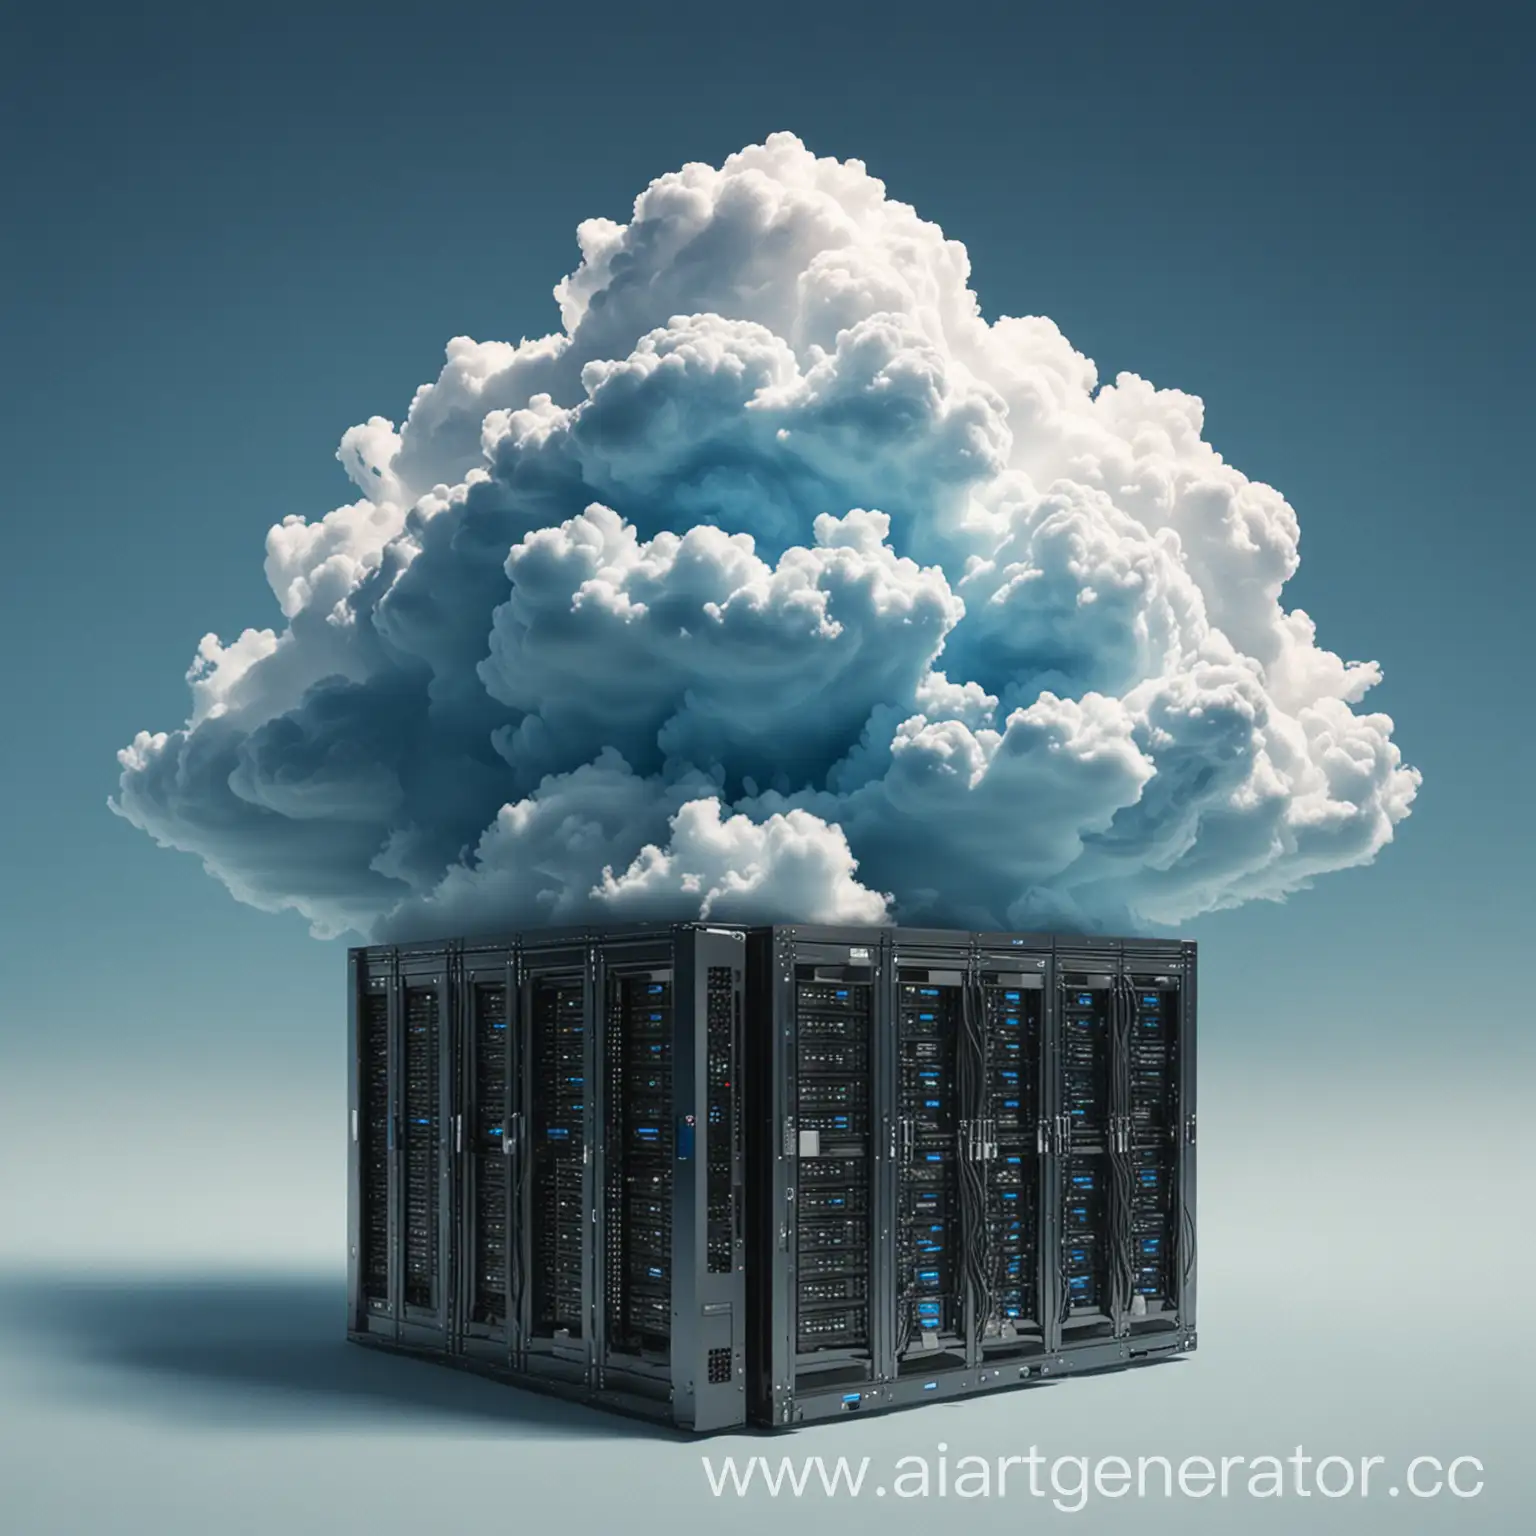 Blue-Cloud-Computing-Servers-in-Network-Environment